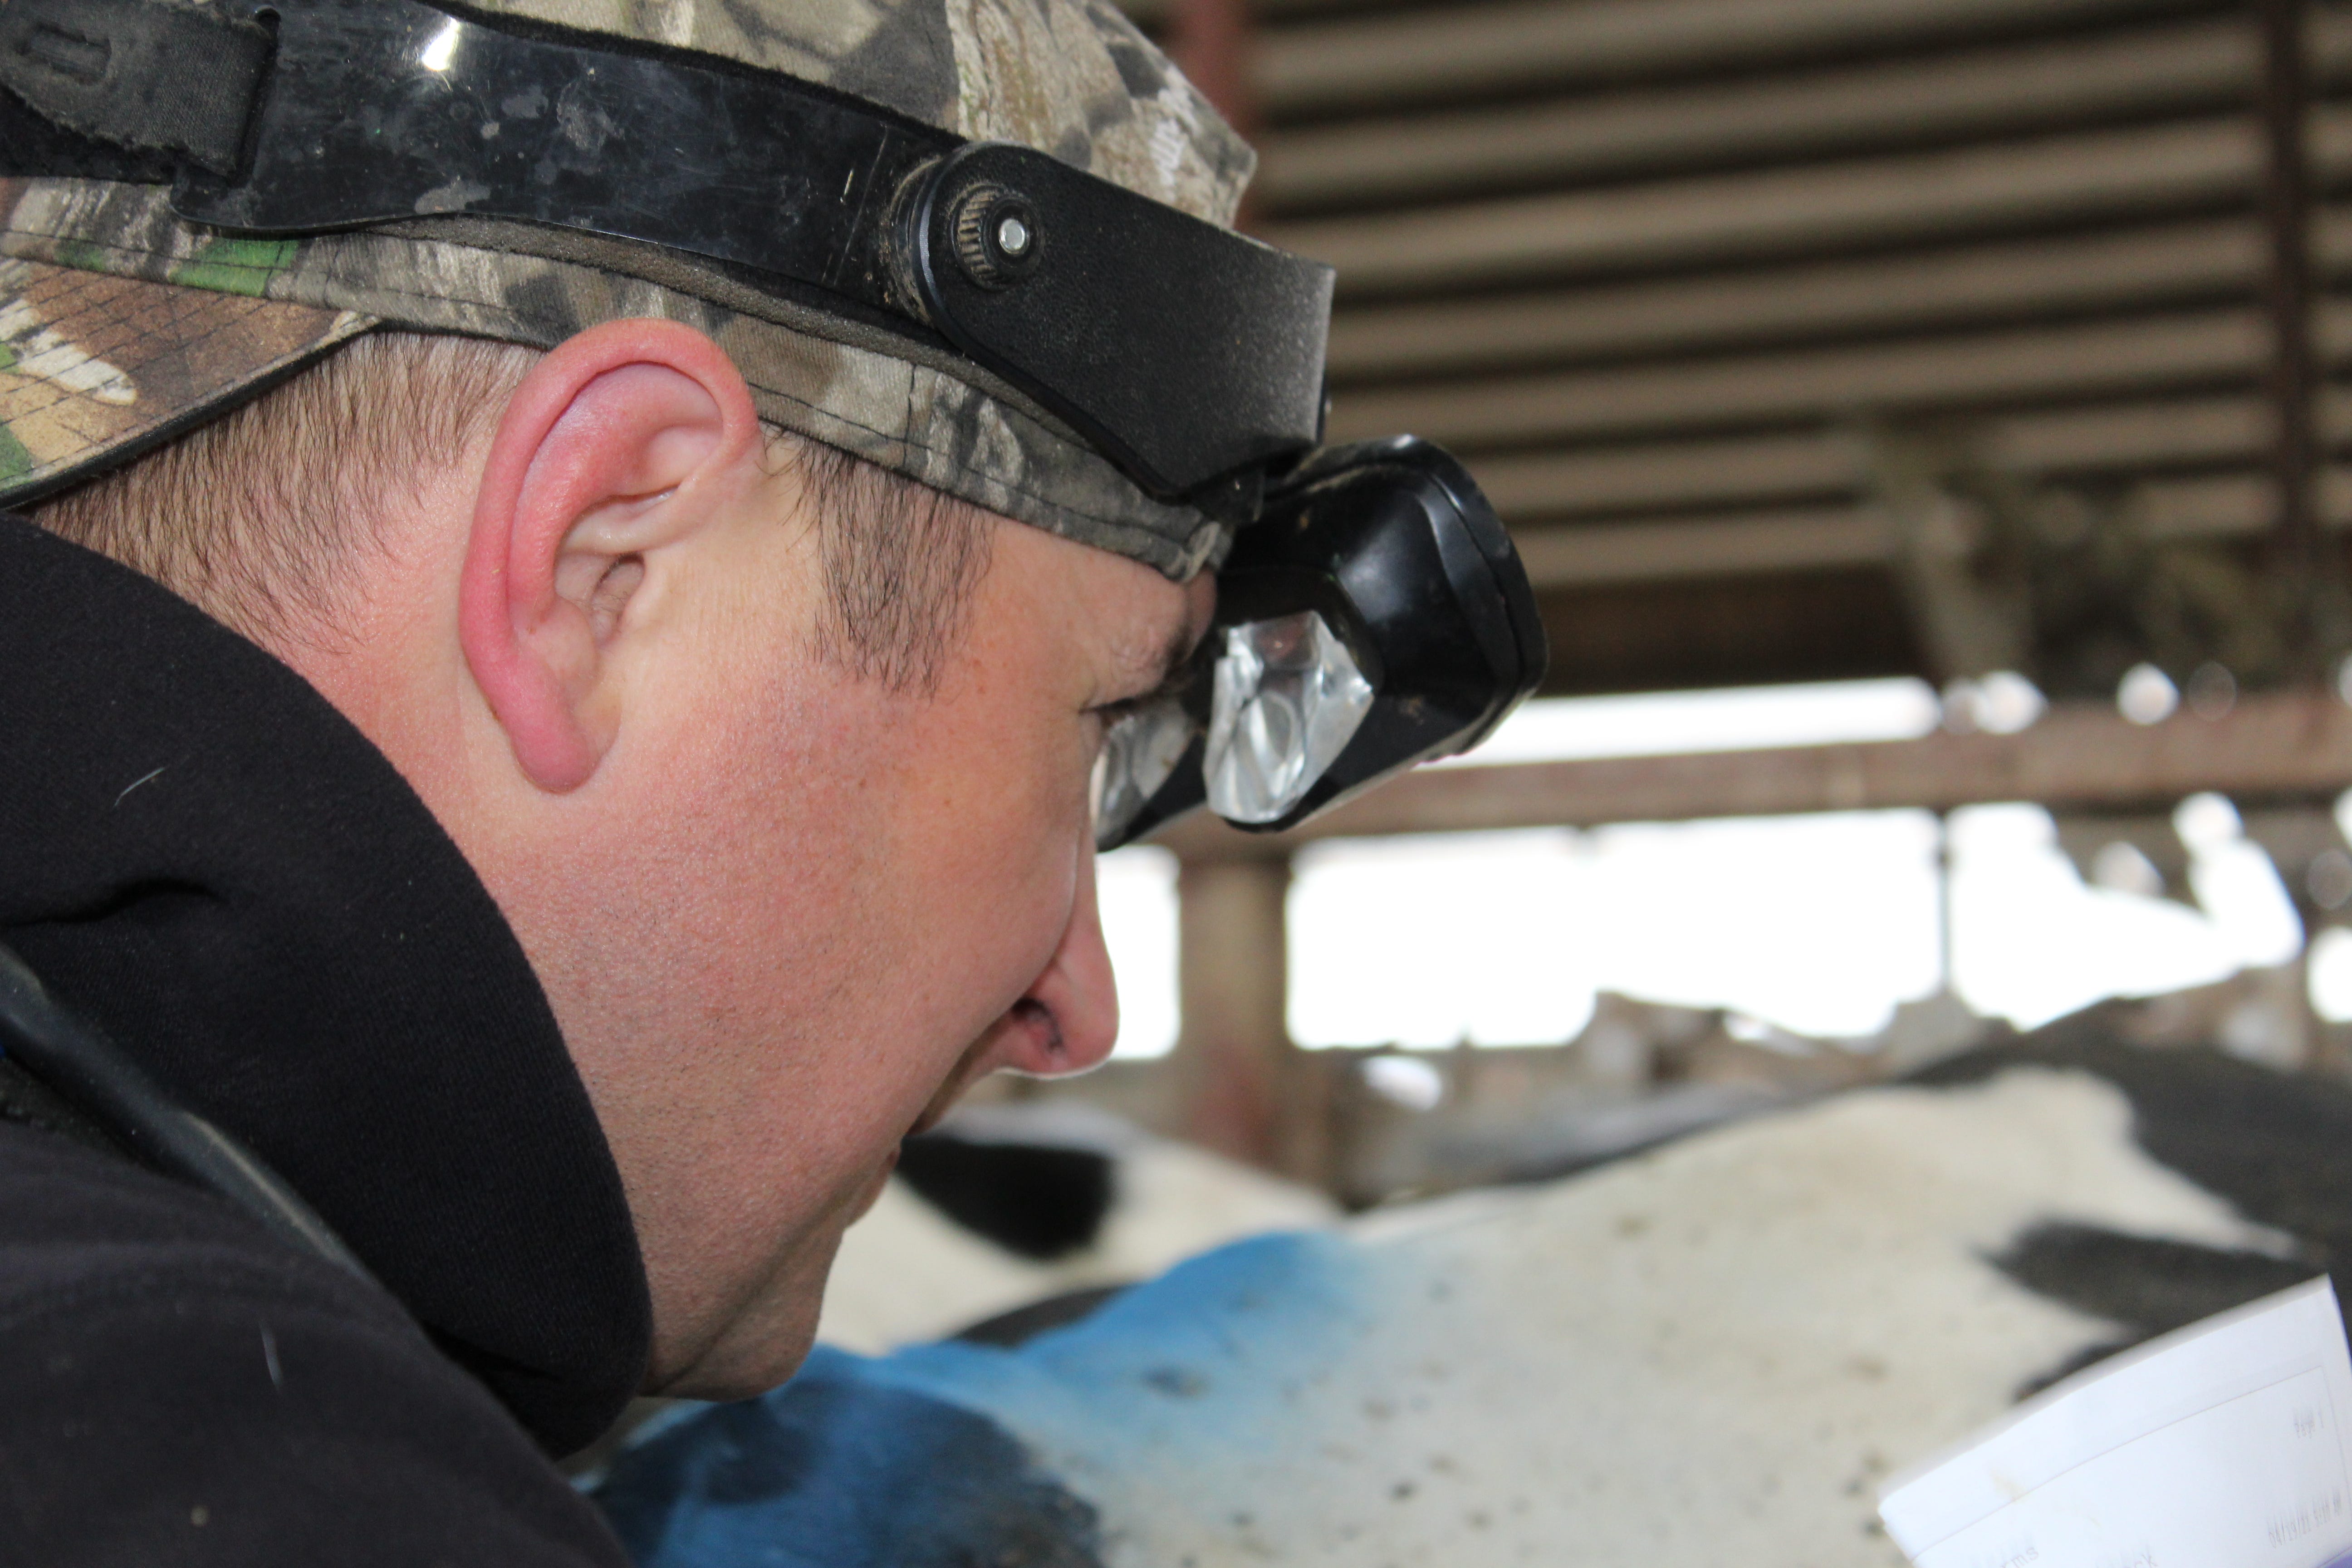 Veterinarian Ralph Stowell peers through ultrasound goggles to detect the stage of pregnancy of a cow at Nehls Brothers Farms in Juneau, Wis.